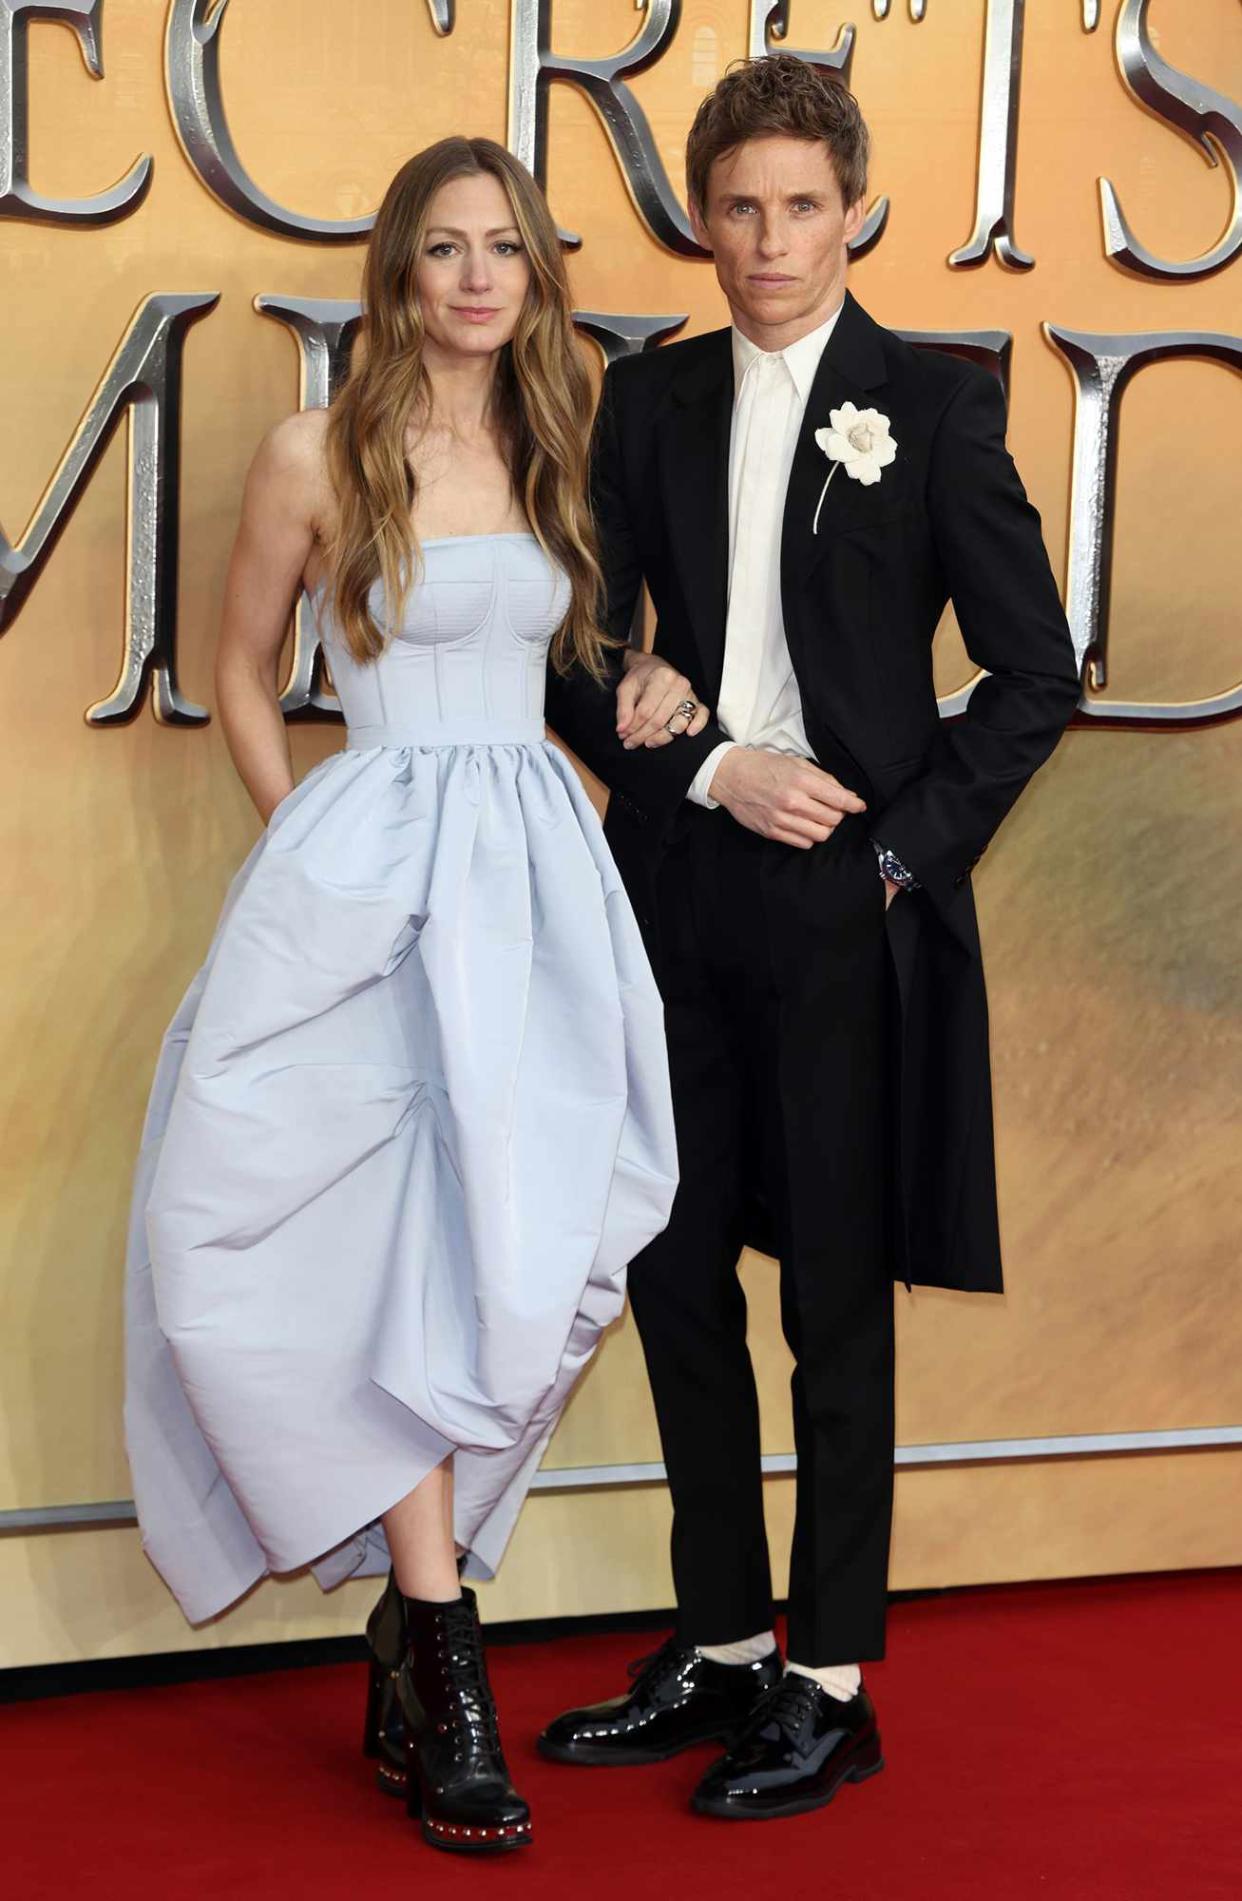 Eddie Redmayne and Hannah Bagshawe attend the "Fantastic Beasts: The Secrets of Dumbledore" world premiere at The Royal Festival Hall on March 29, 2022 in London, England